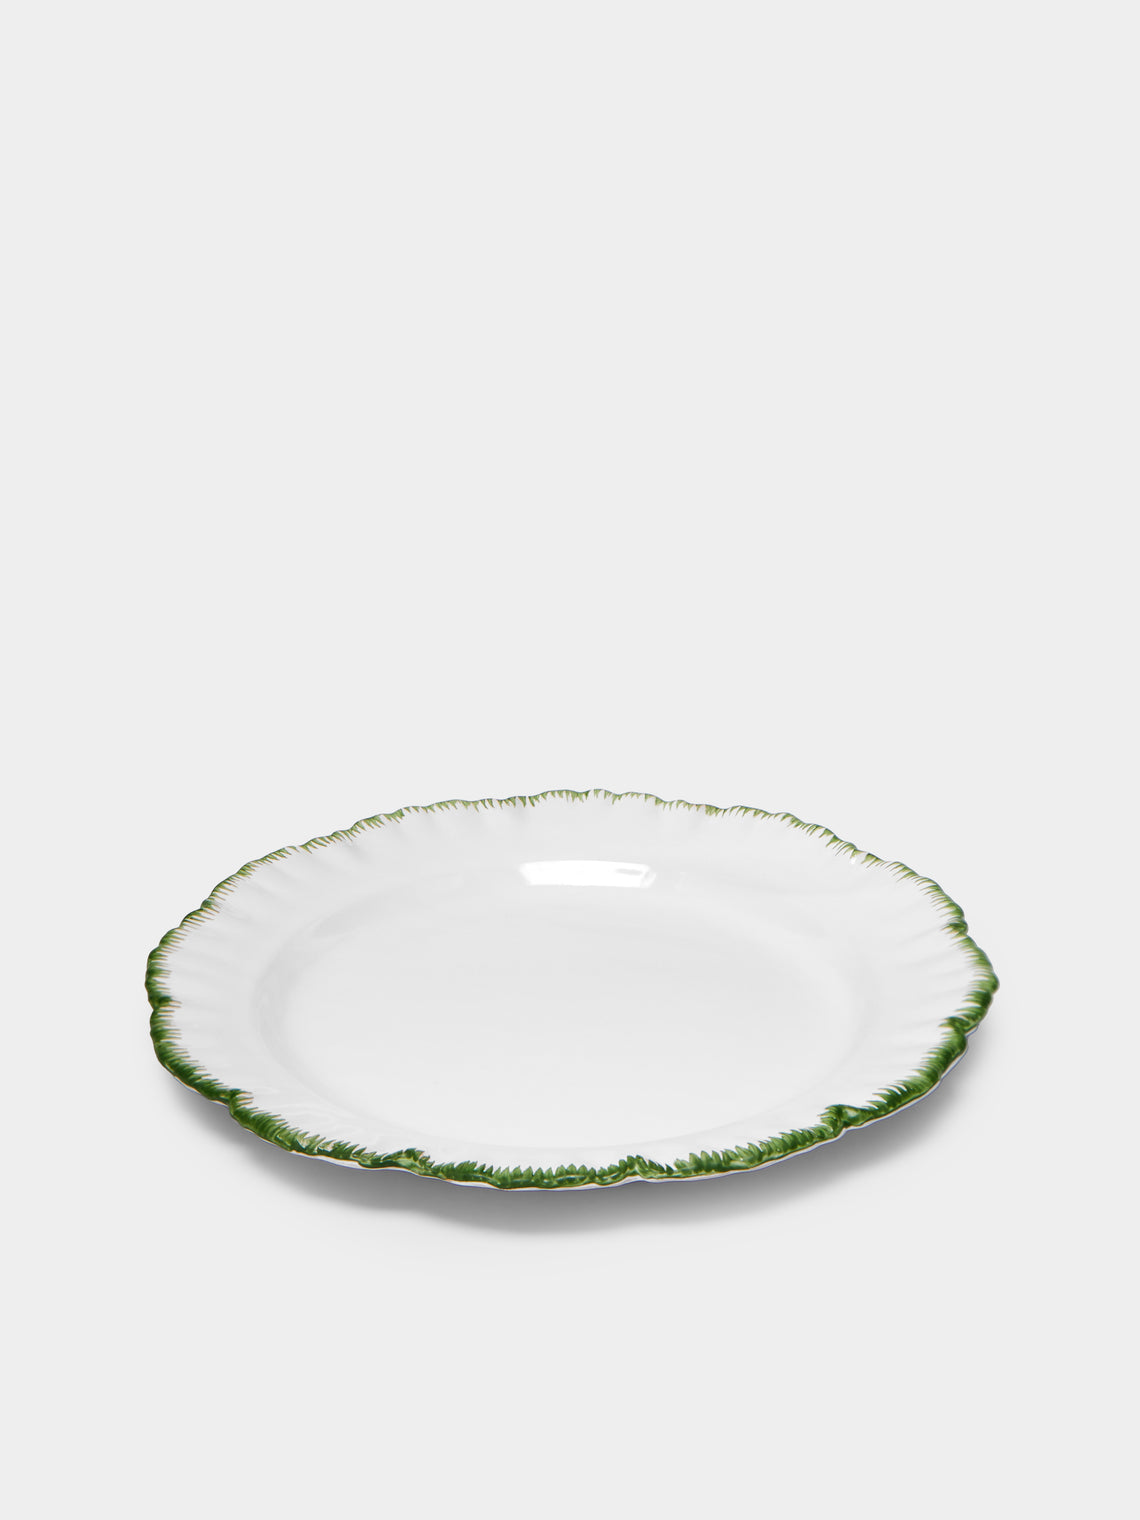 Atelier Soleil - Combed Edge Hand-Painted Ceramic Side Plate -  - ABASK